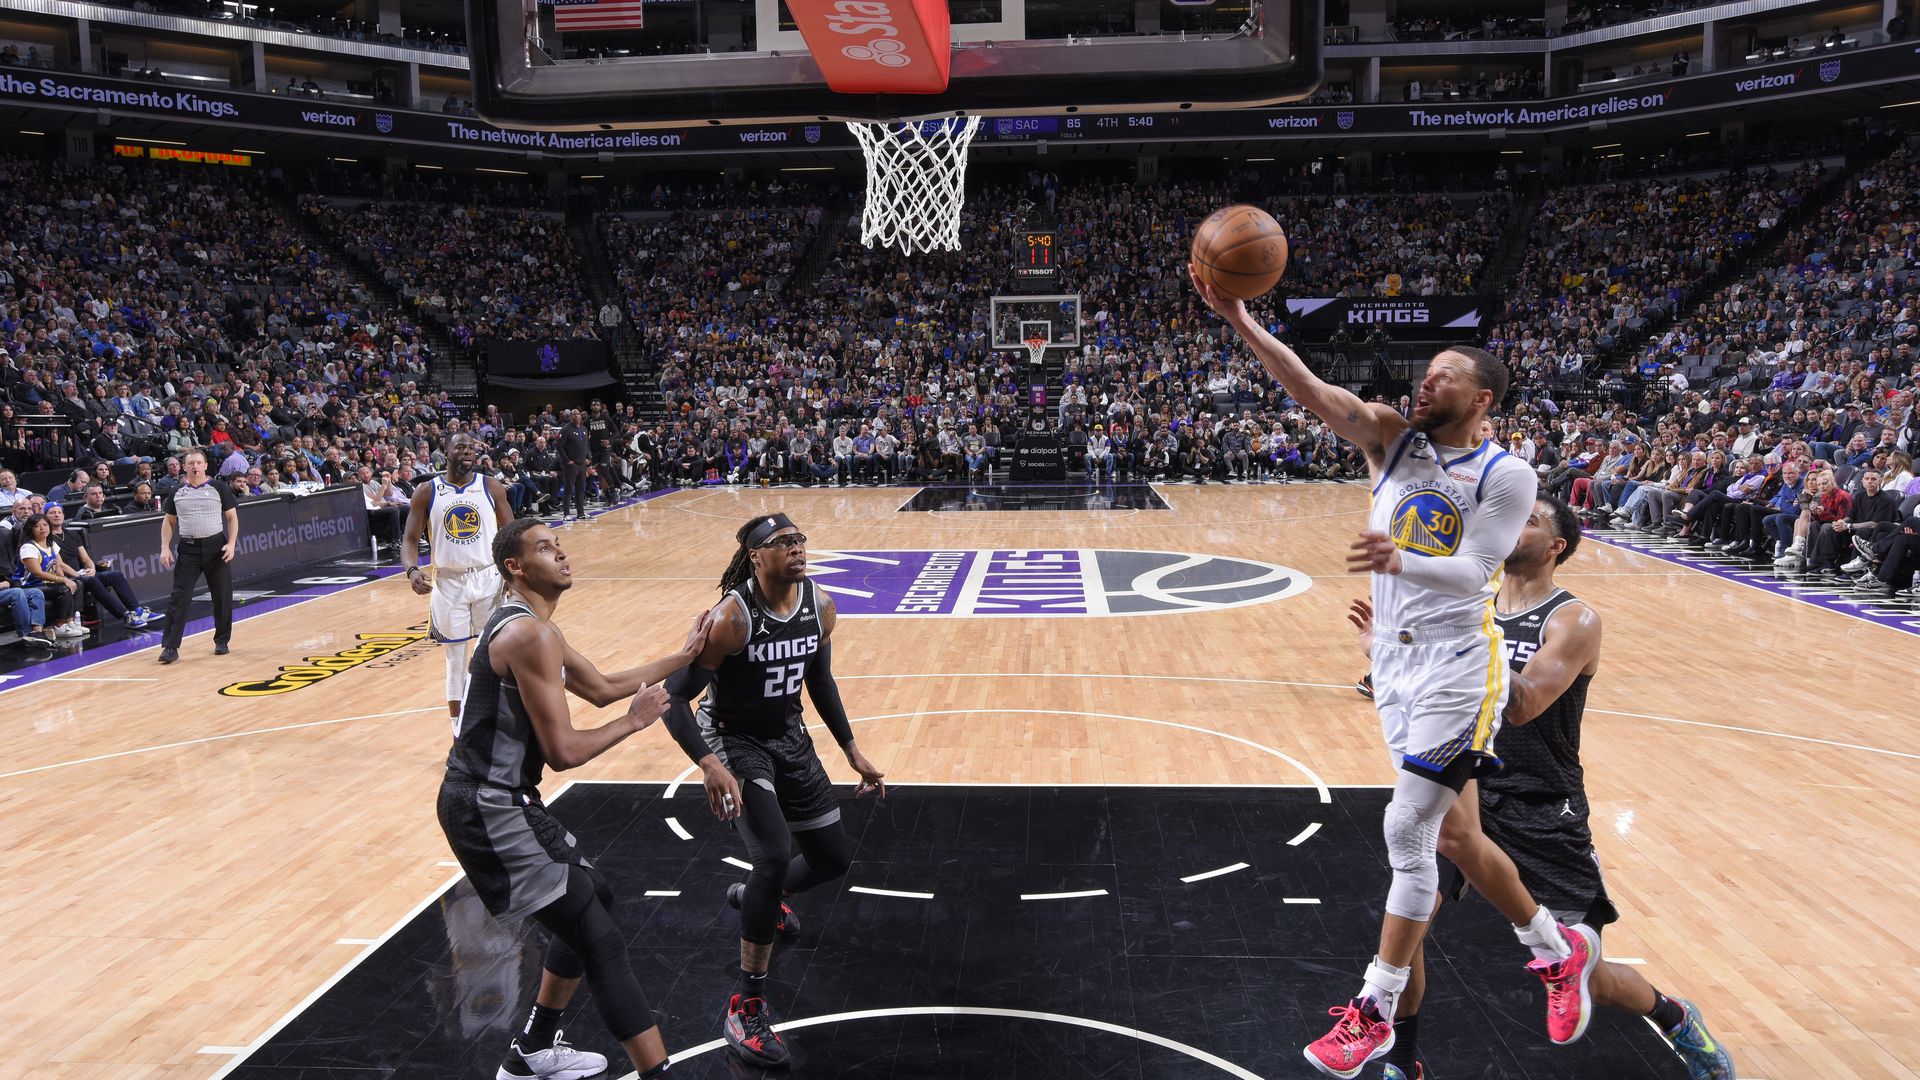 stephen curry, wearing a white jersey, drives toward the hoop for a layup